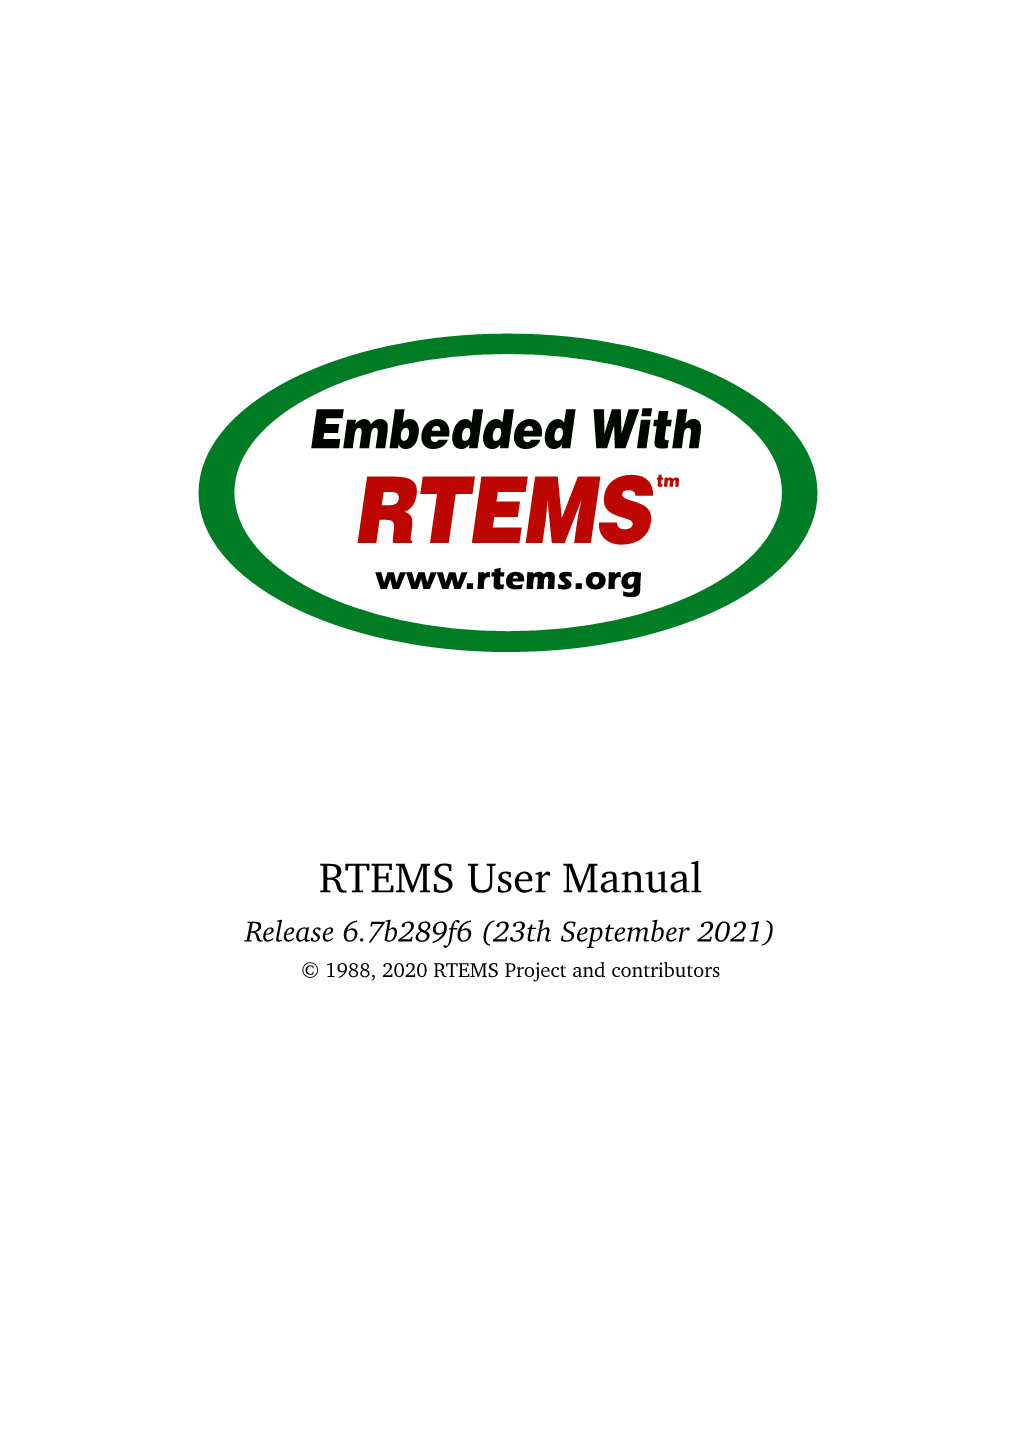 RTEMS User Manual Release 6.7B289f6 (23Th September 2021) © 1988, 2020 RTEMS Project and Contributors